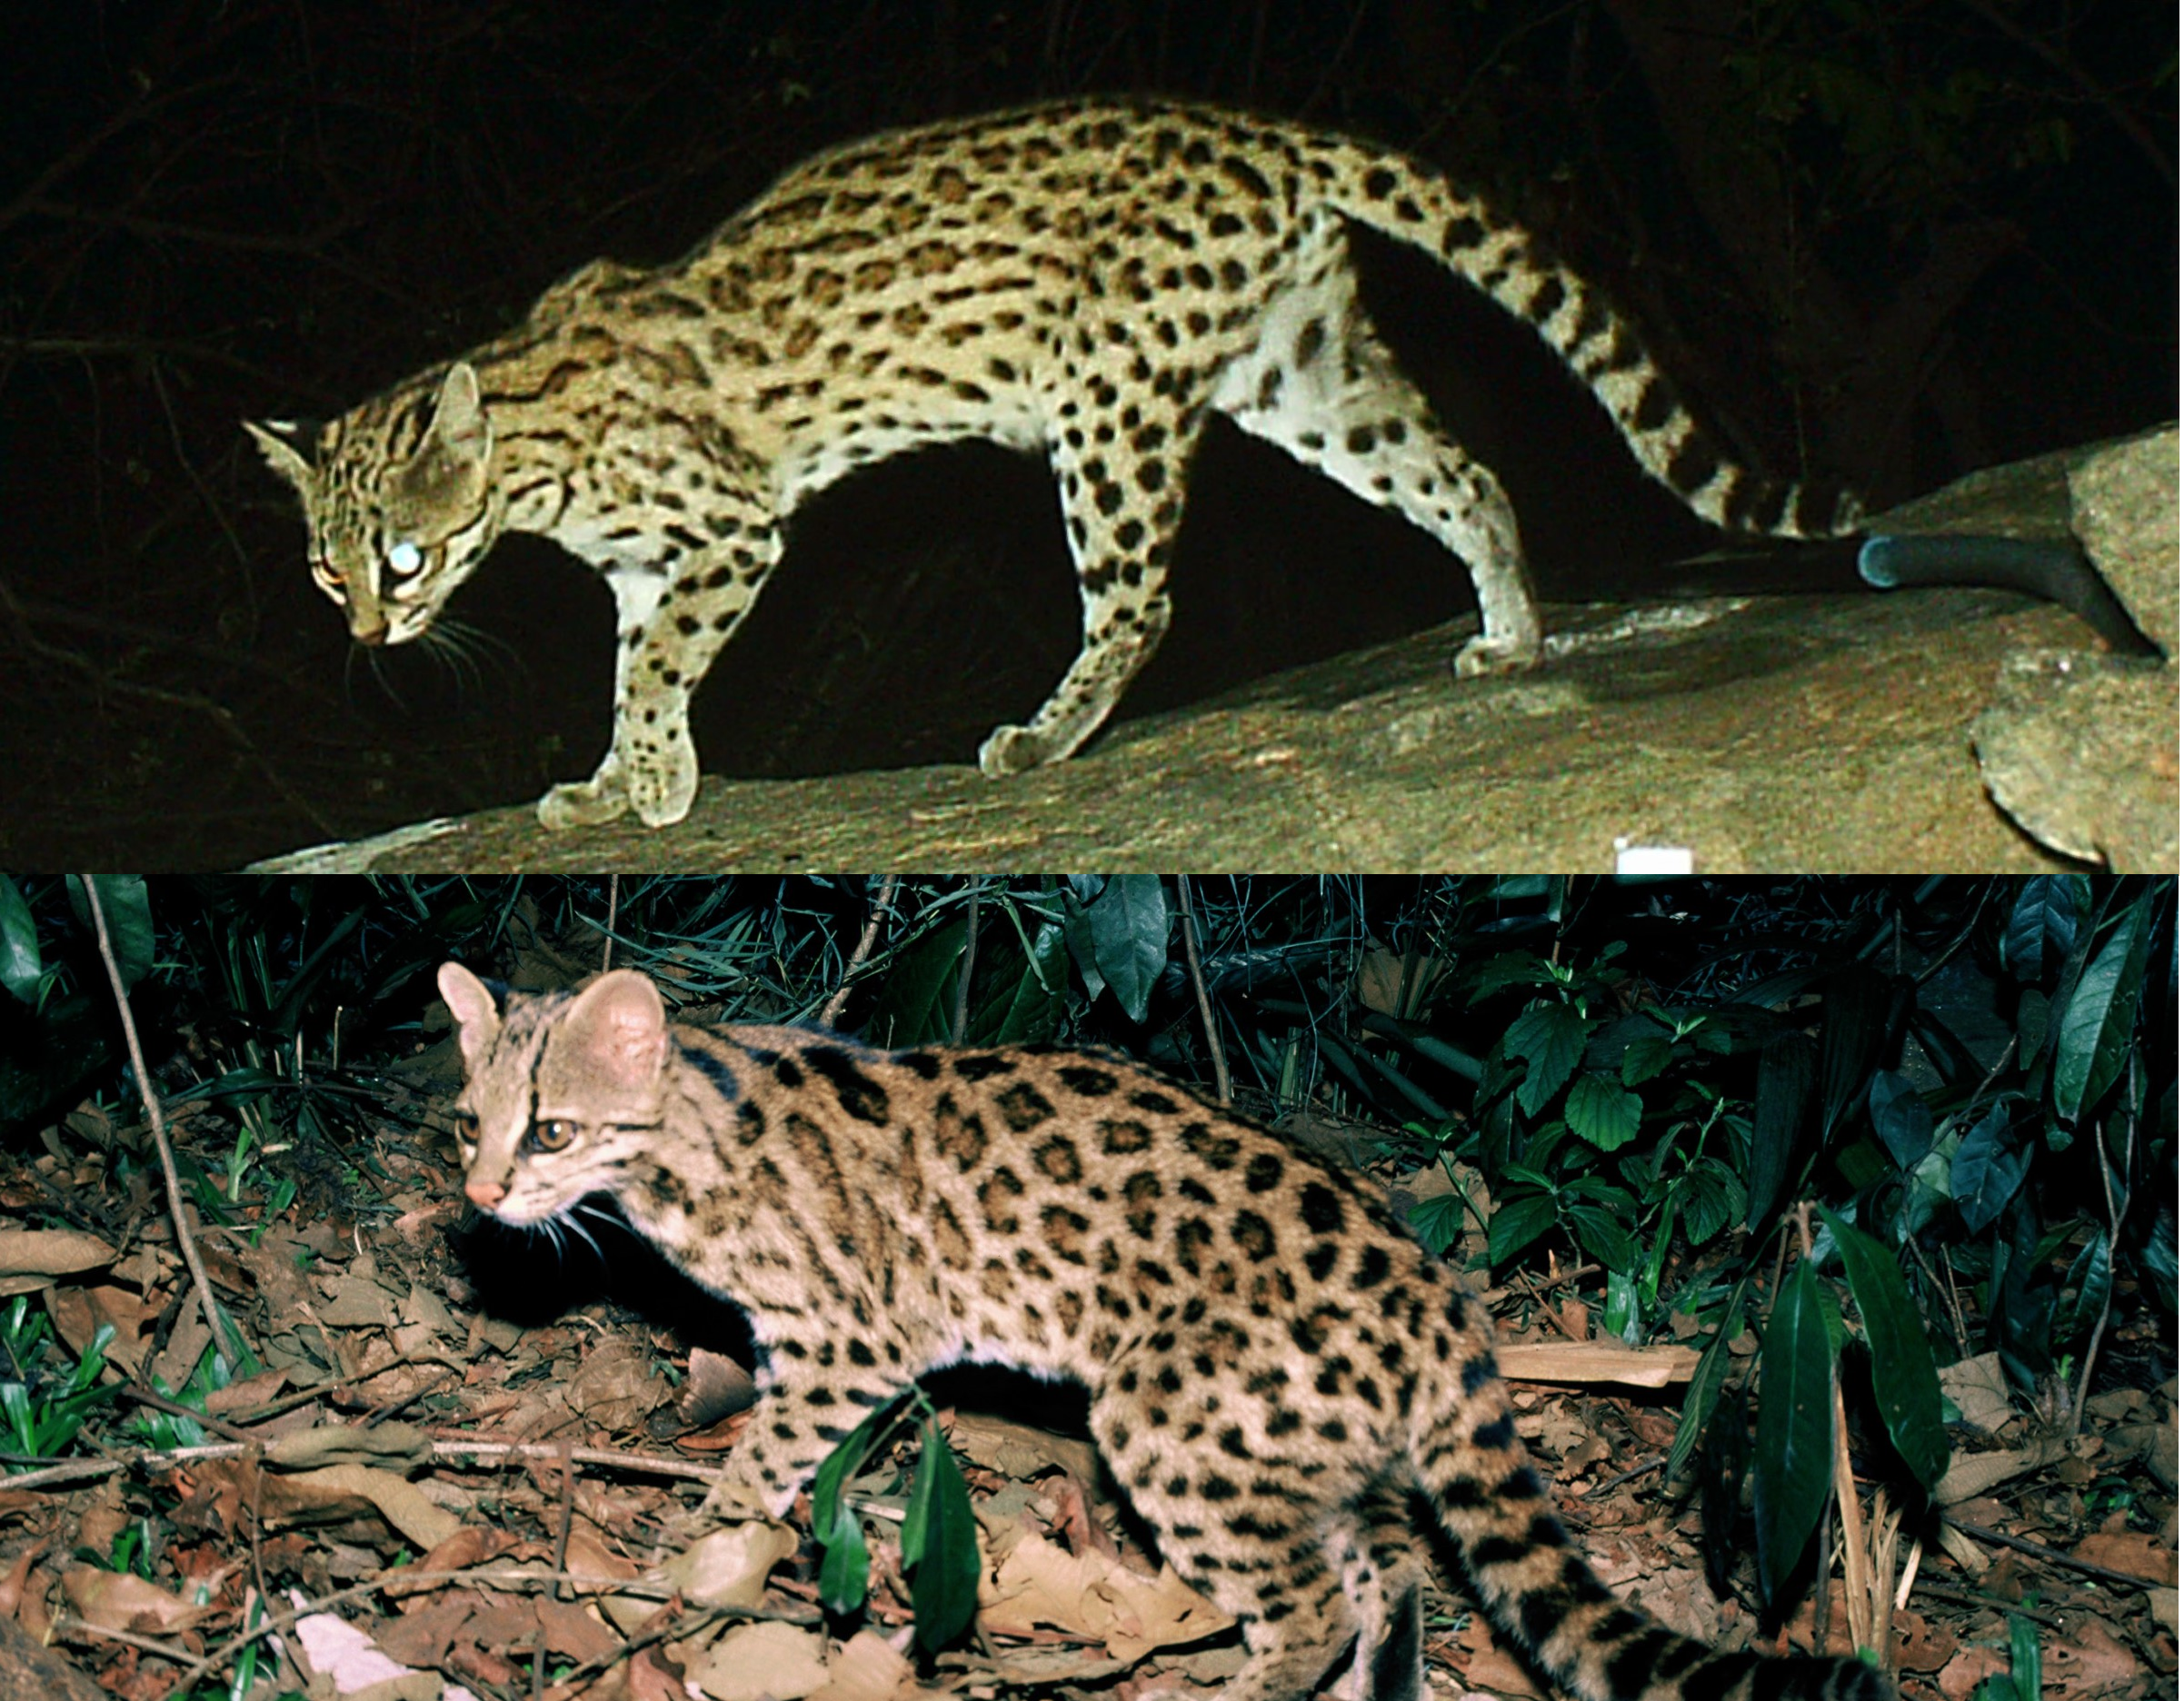 Two other species of tiger cat:  the northern tiger cat (top) and the Atlantic Forest tiger cat (bottom).